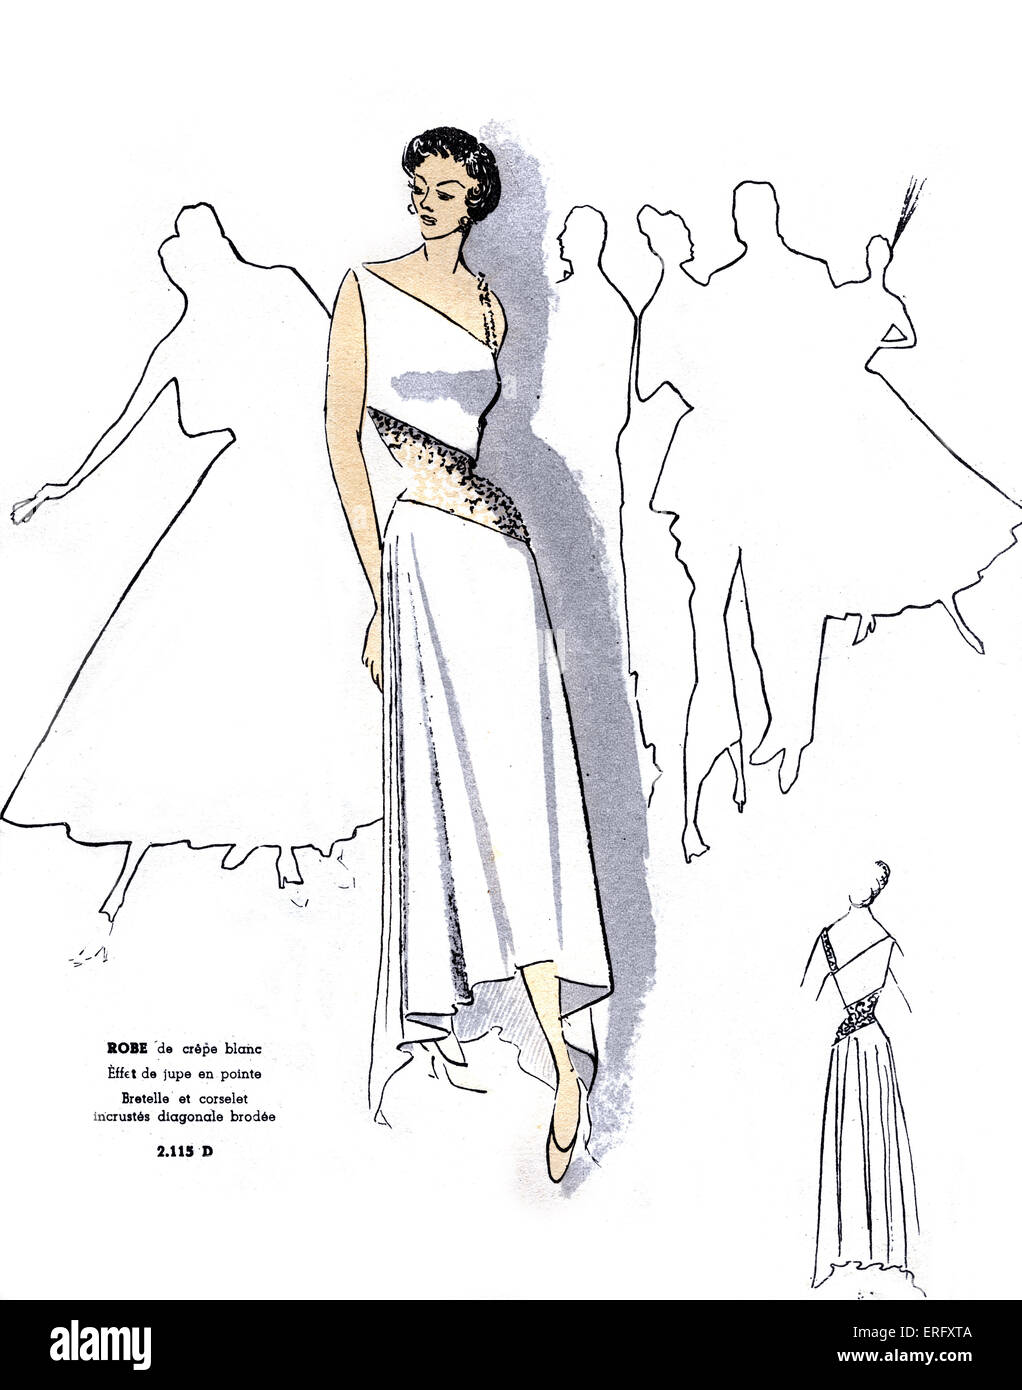 French fashion, white crepe evening dress design/ Robe de crêpe blanc. For the late 1940s. Strap and corselet inlayed with Stock Photo